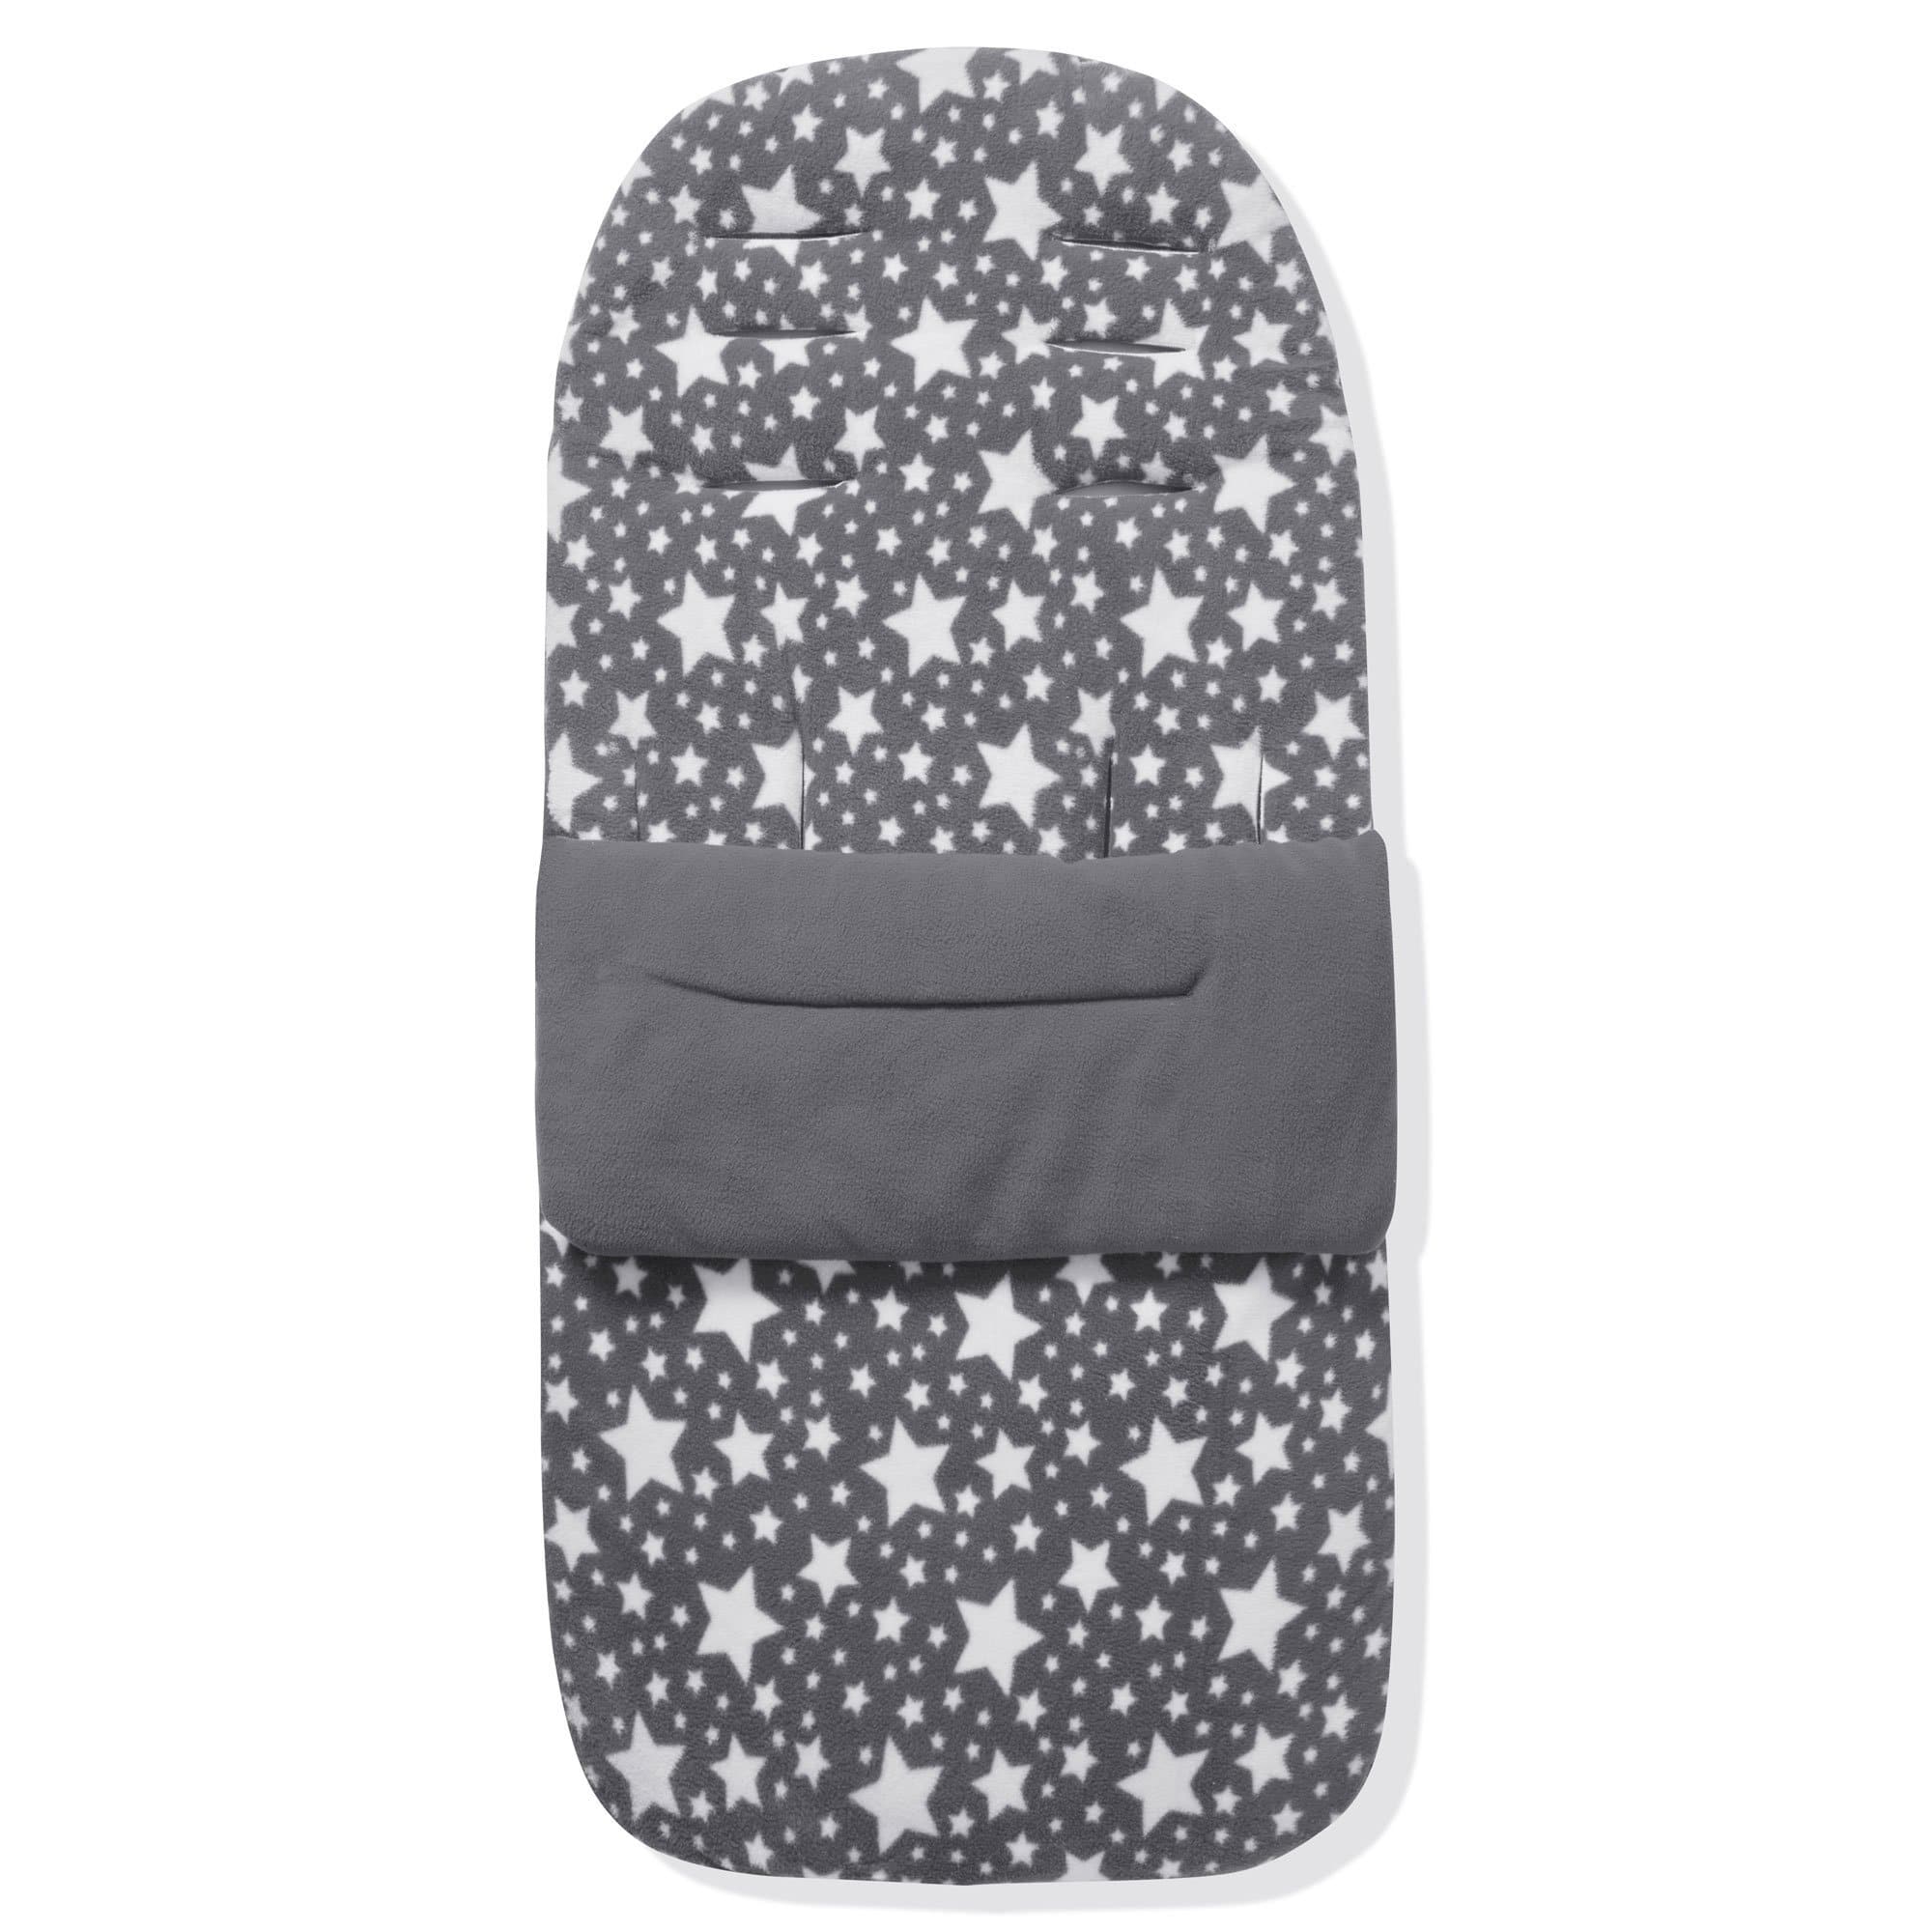 Fleece Footmuff / Cosy Toes Compatible With Easywalker - Grey Star / Fits All Models | For Your Little One